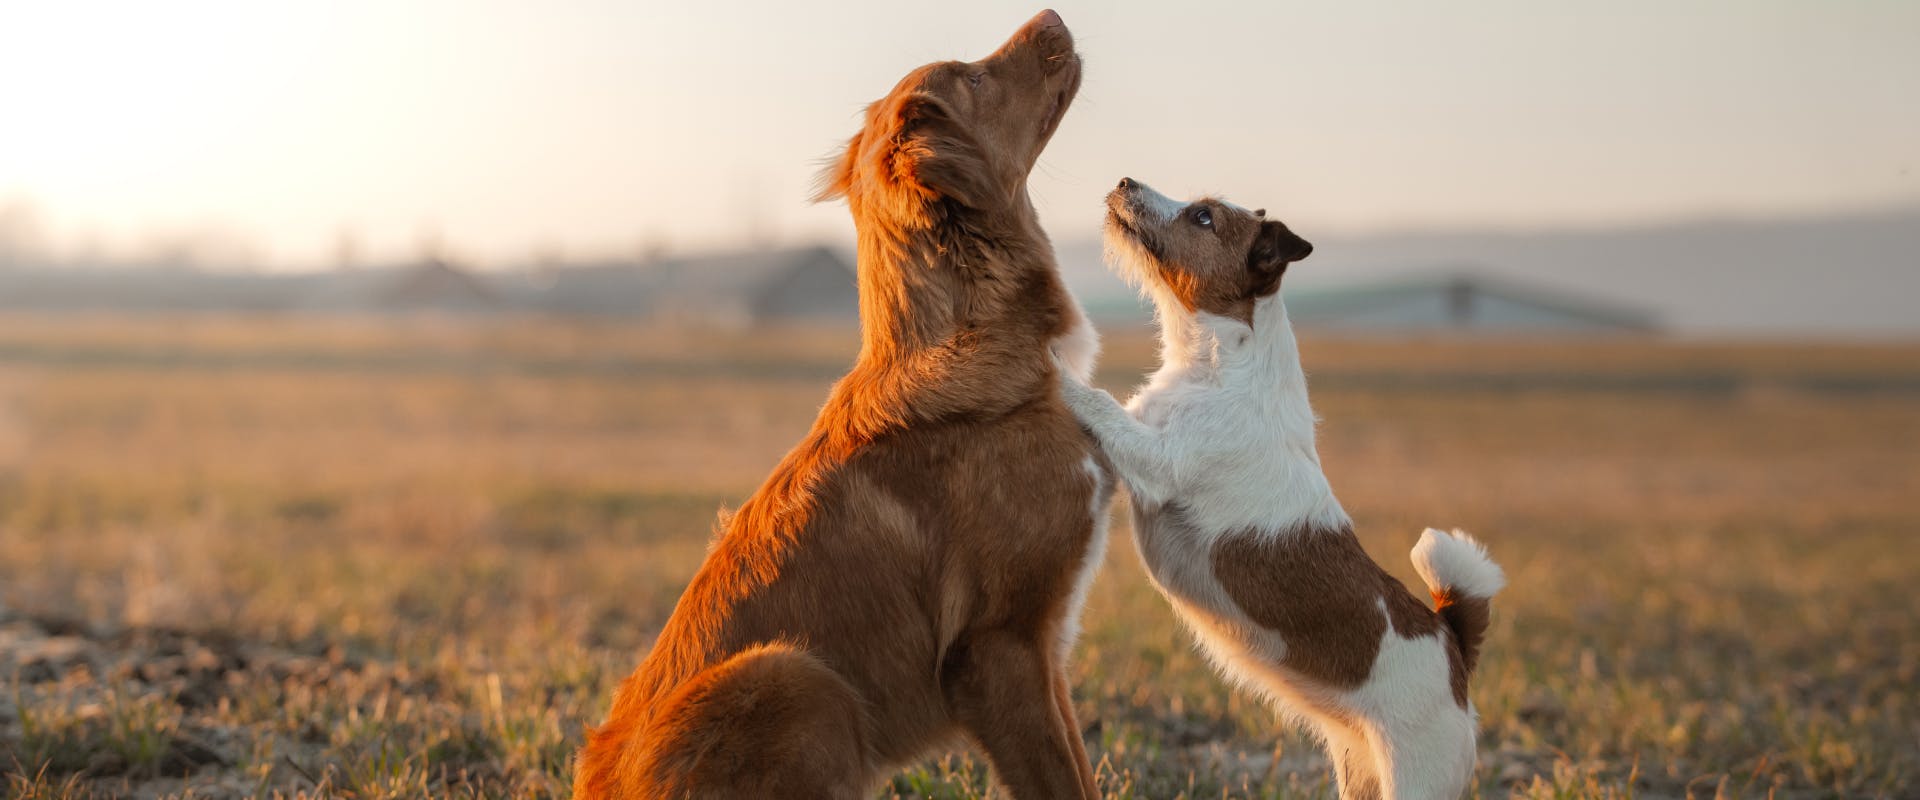 a small dog breed and large dog breed playing together in a field